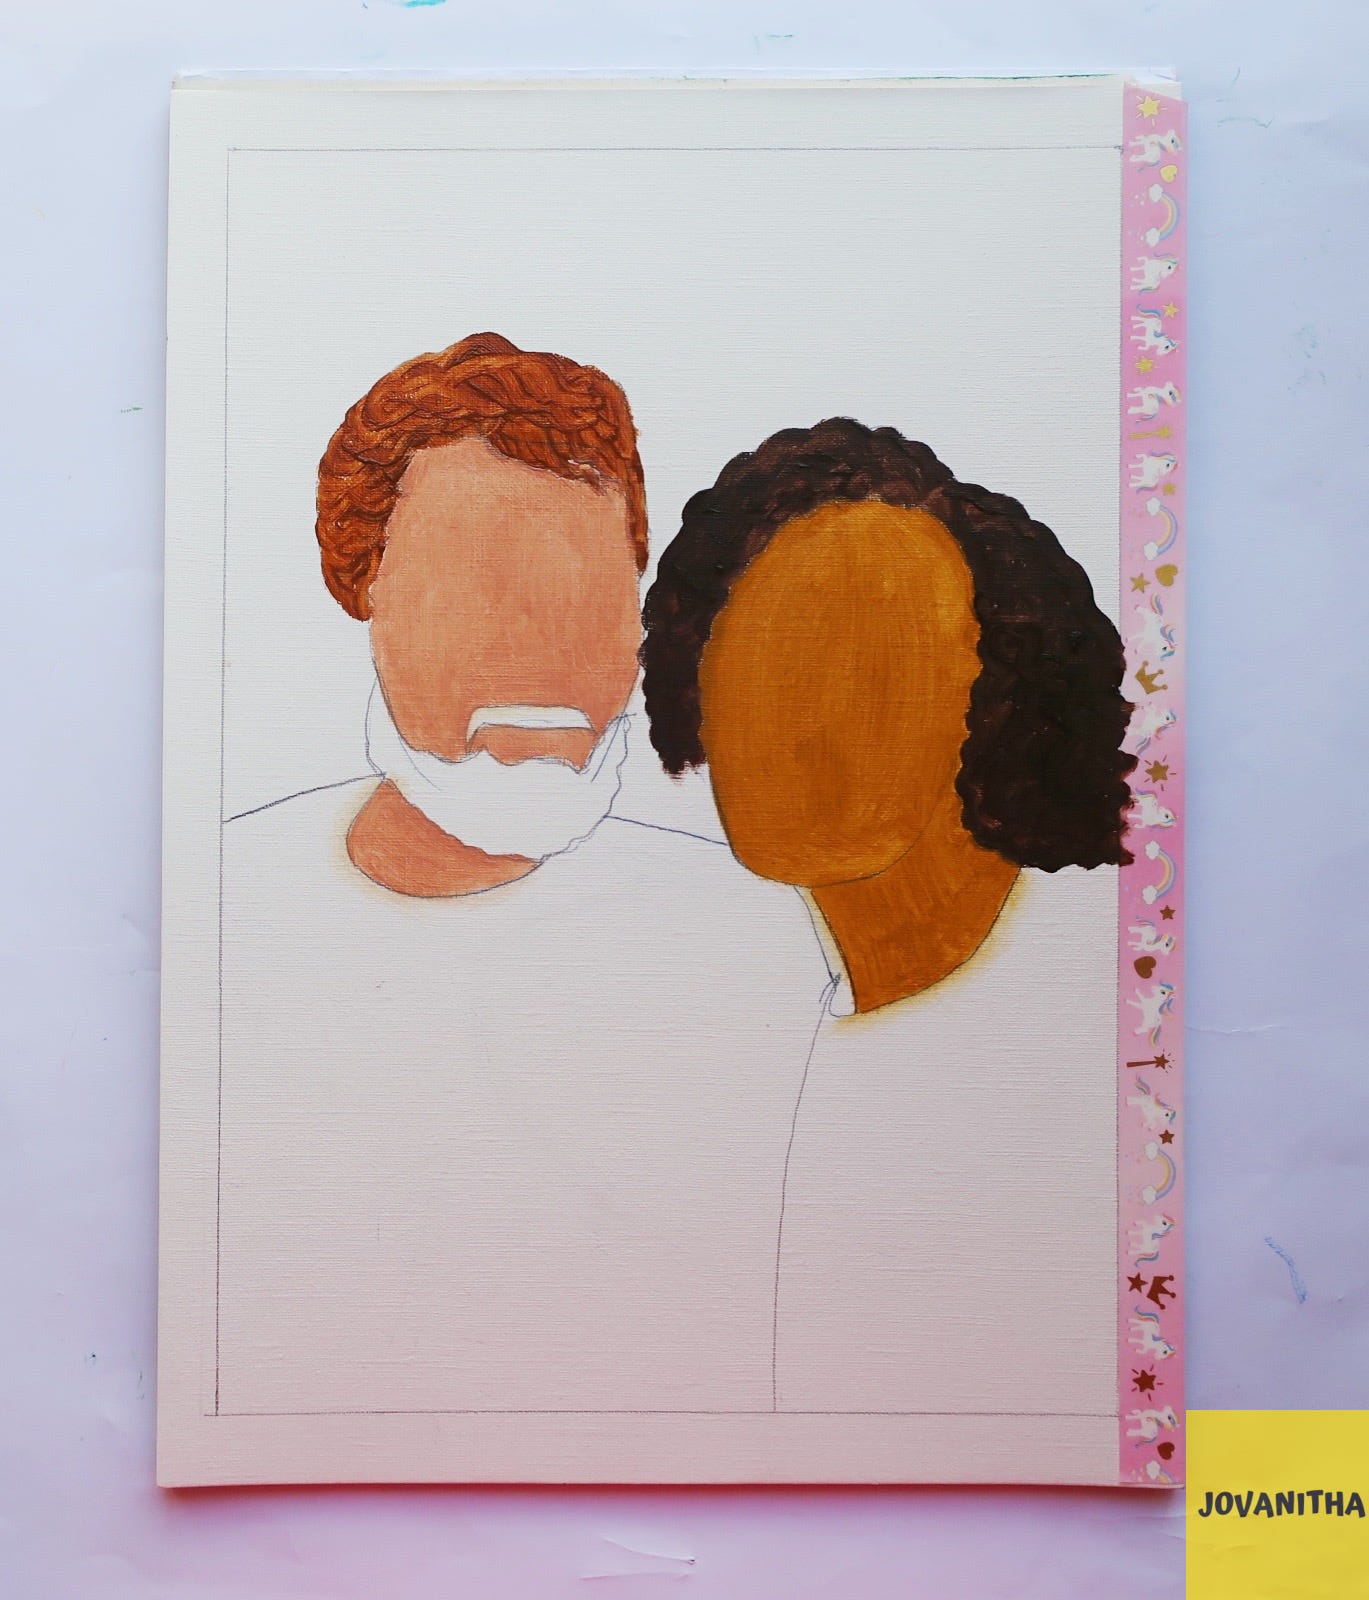 An oil painting of a red headed man and a brown girl